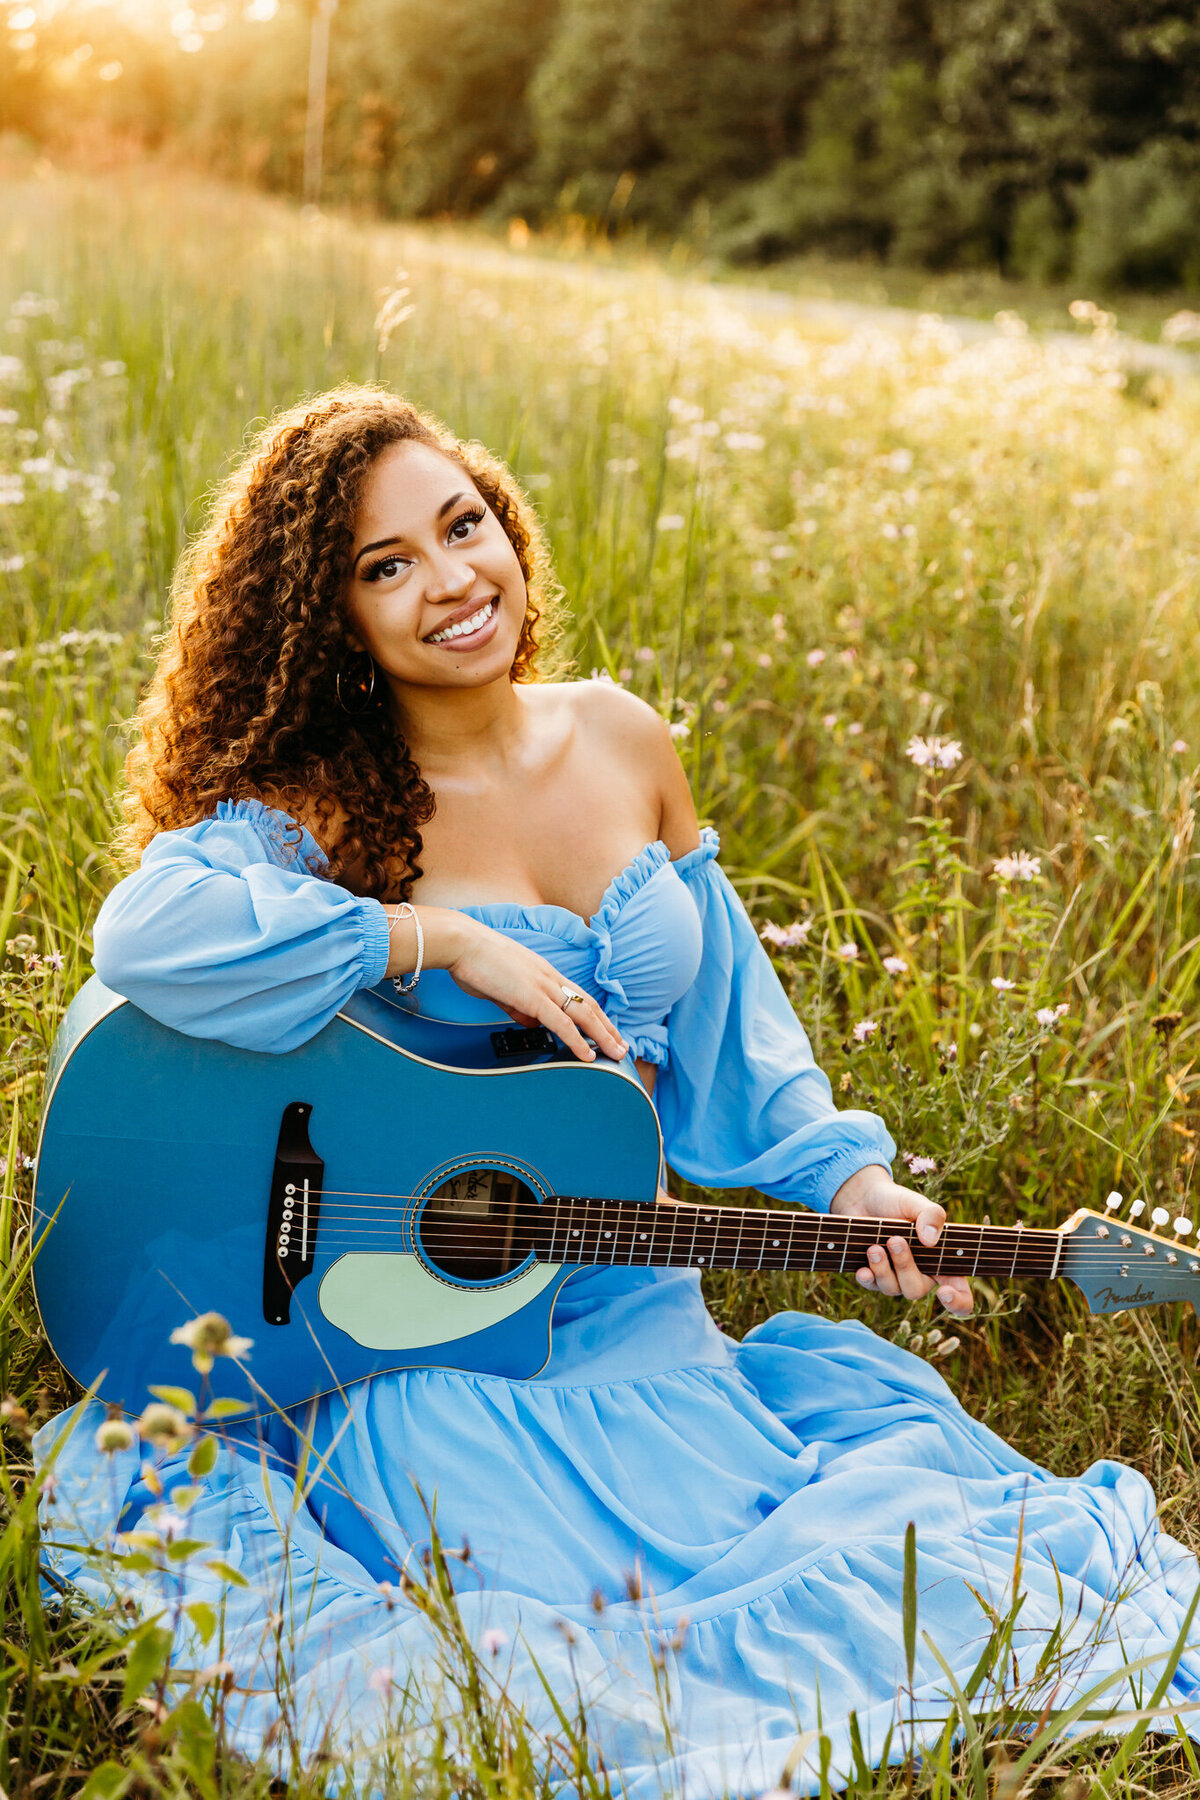 high school senior holding her blue guitar while sitting in a grassy field at sunset